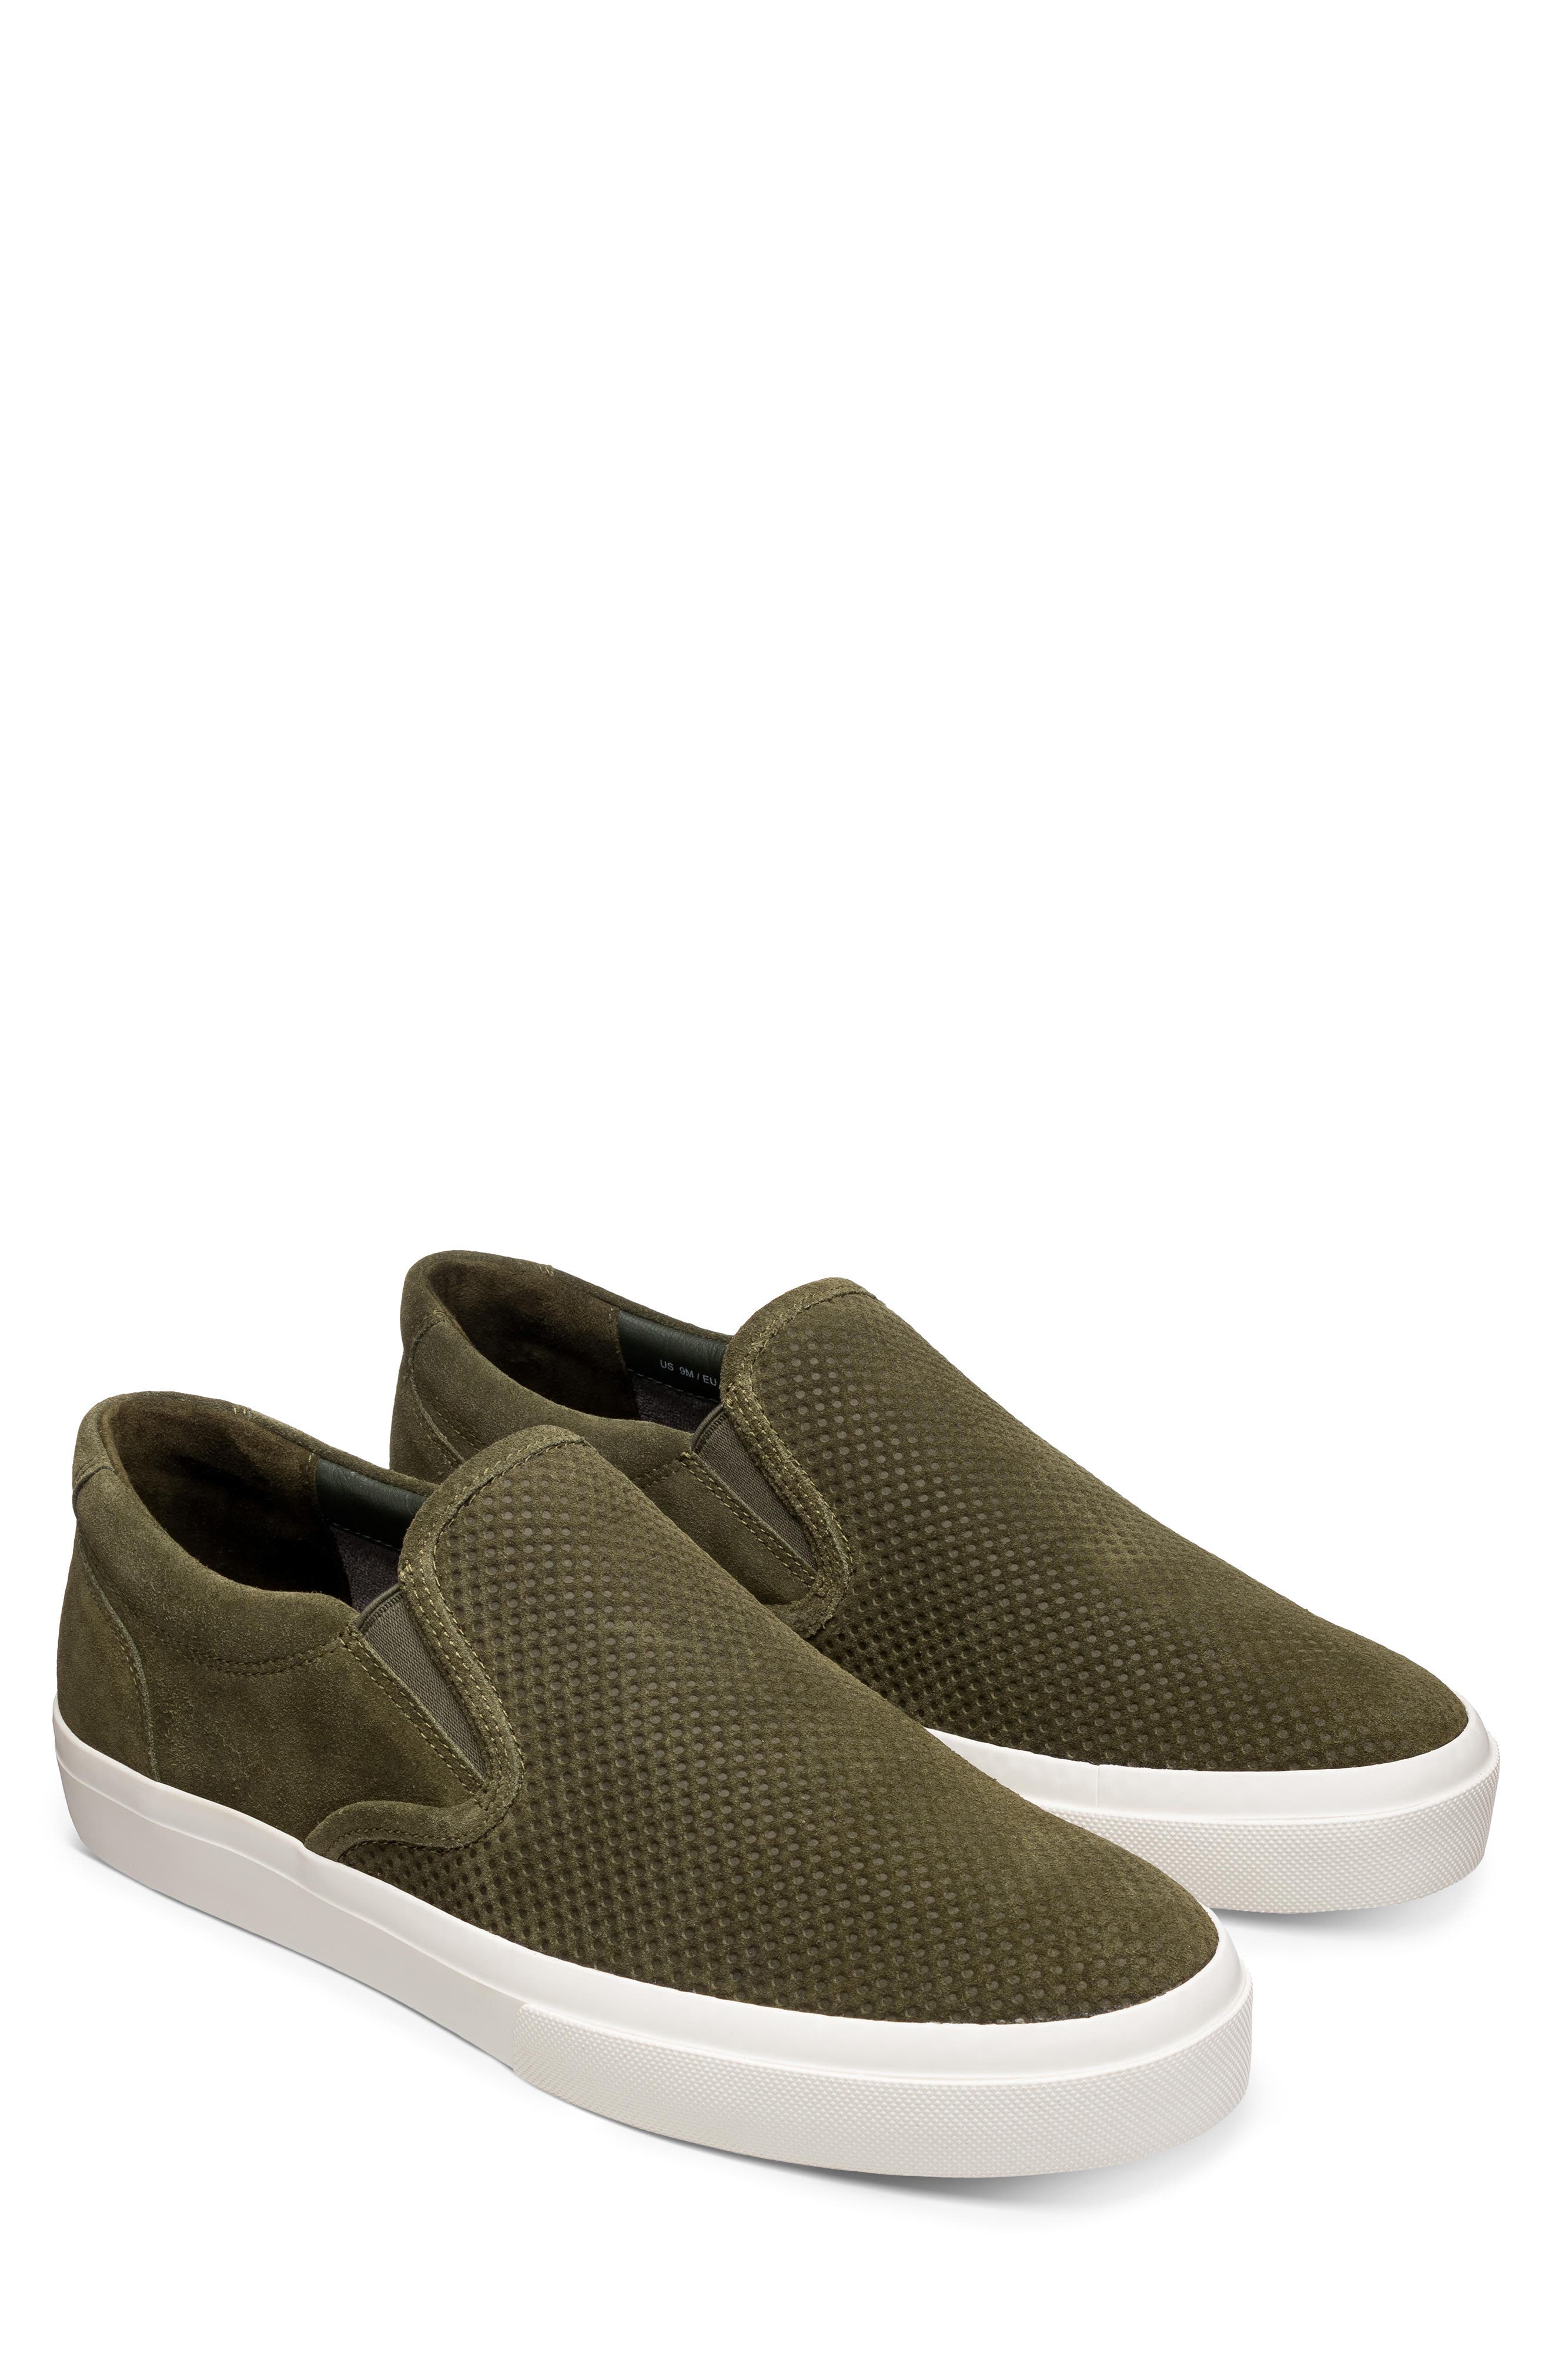 greats shoes slip on